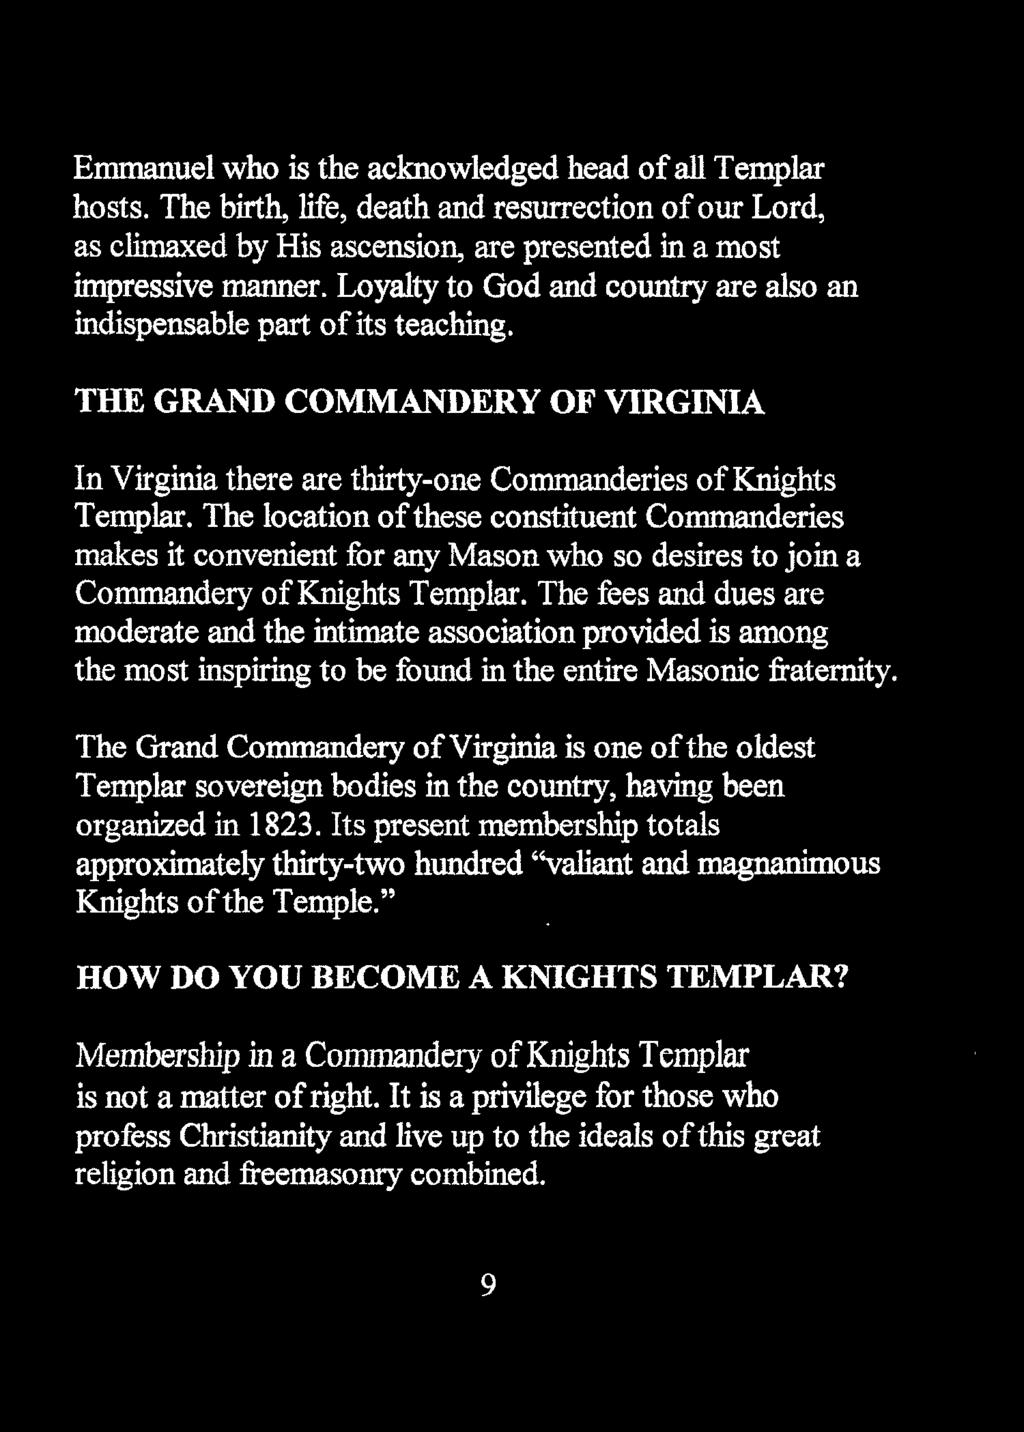 The location of these constituent Commanderies makes it convenient for any Mason who so desires to join a Commandery ofk.nights Templar.